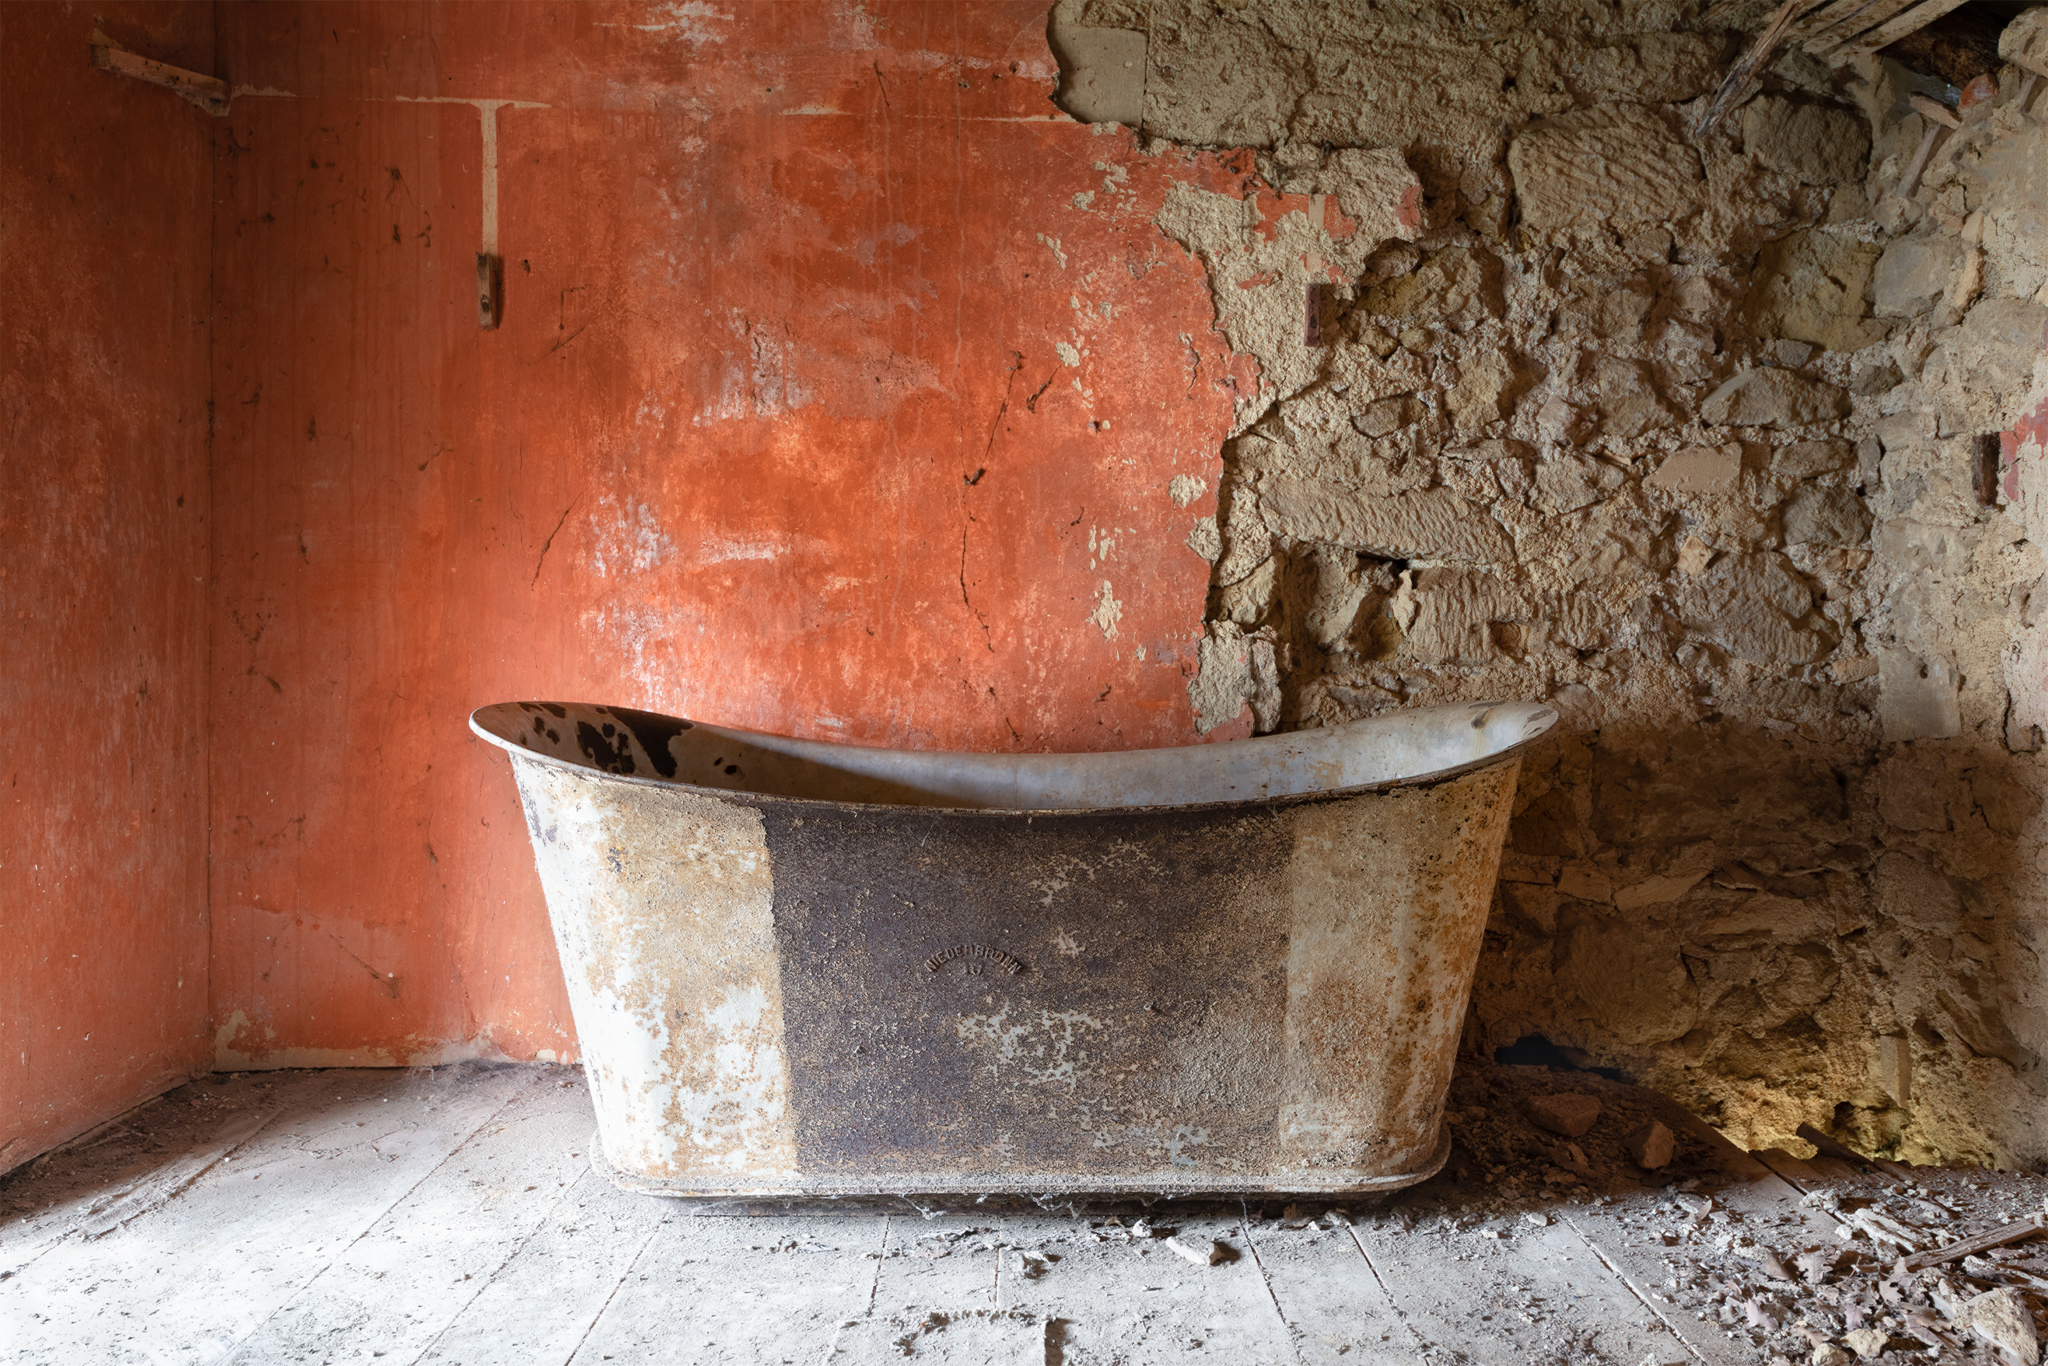 Abandoned bathtub inside a derelict castle located in the south of France